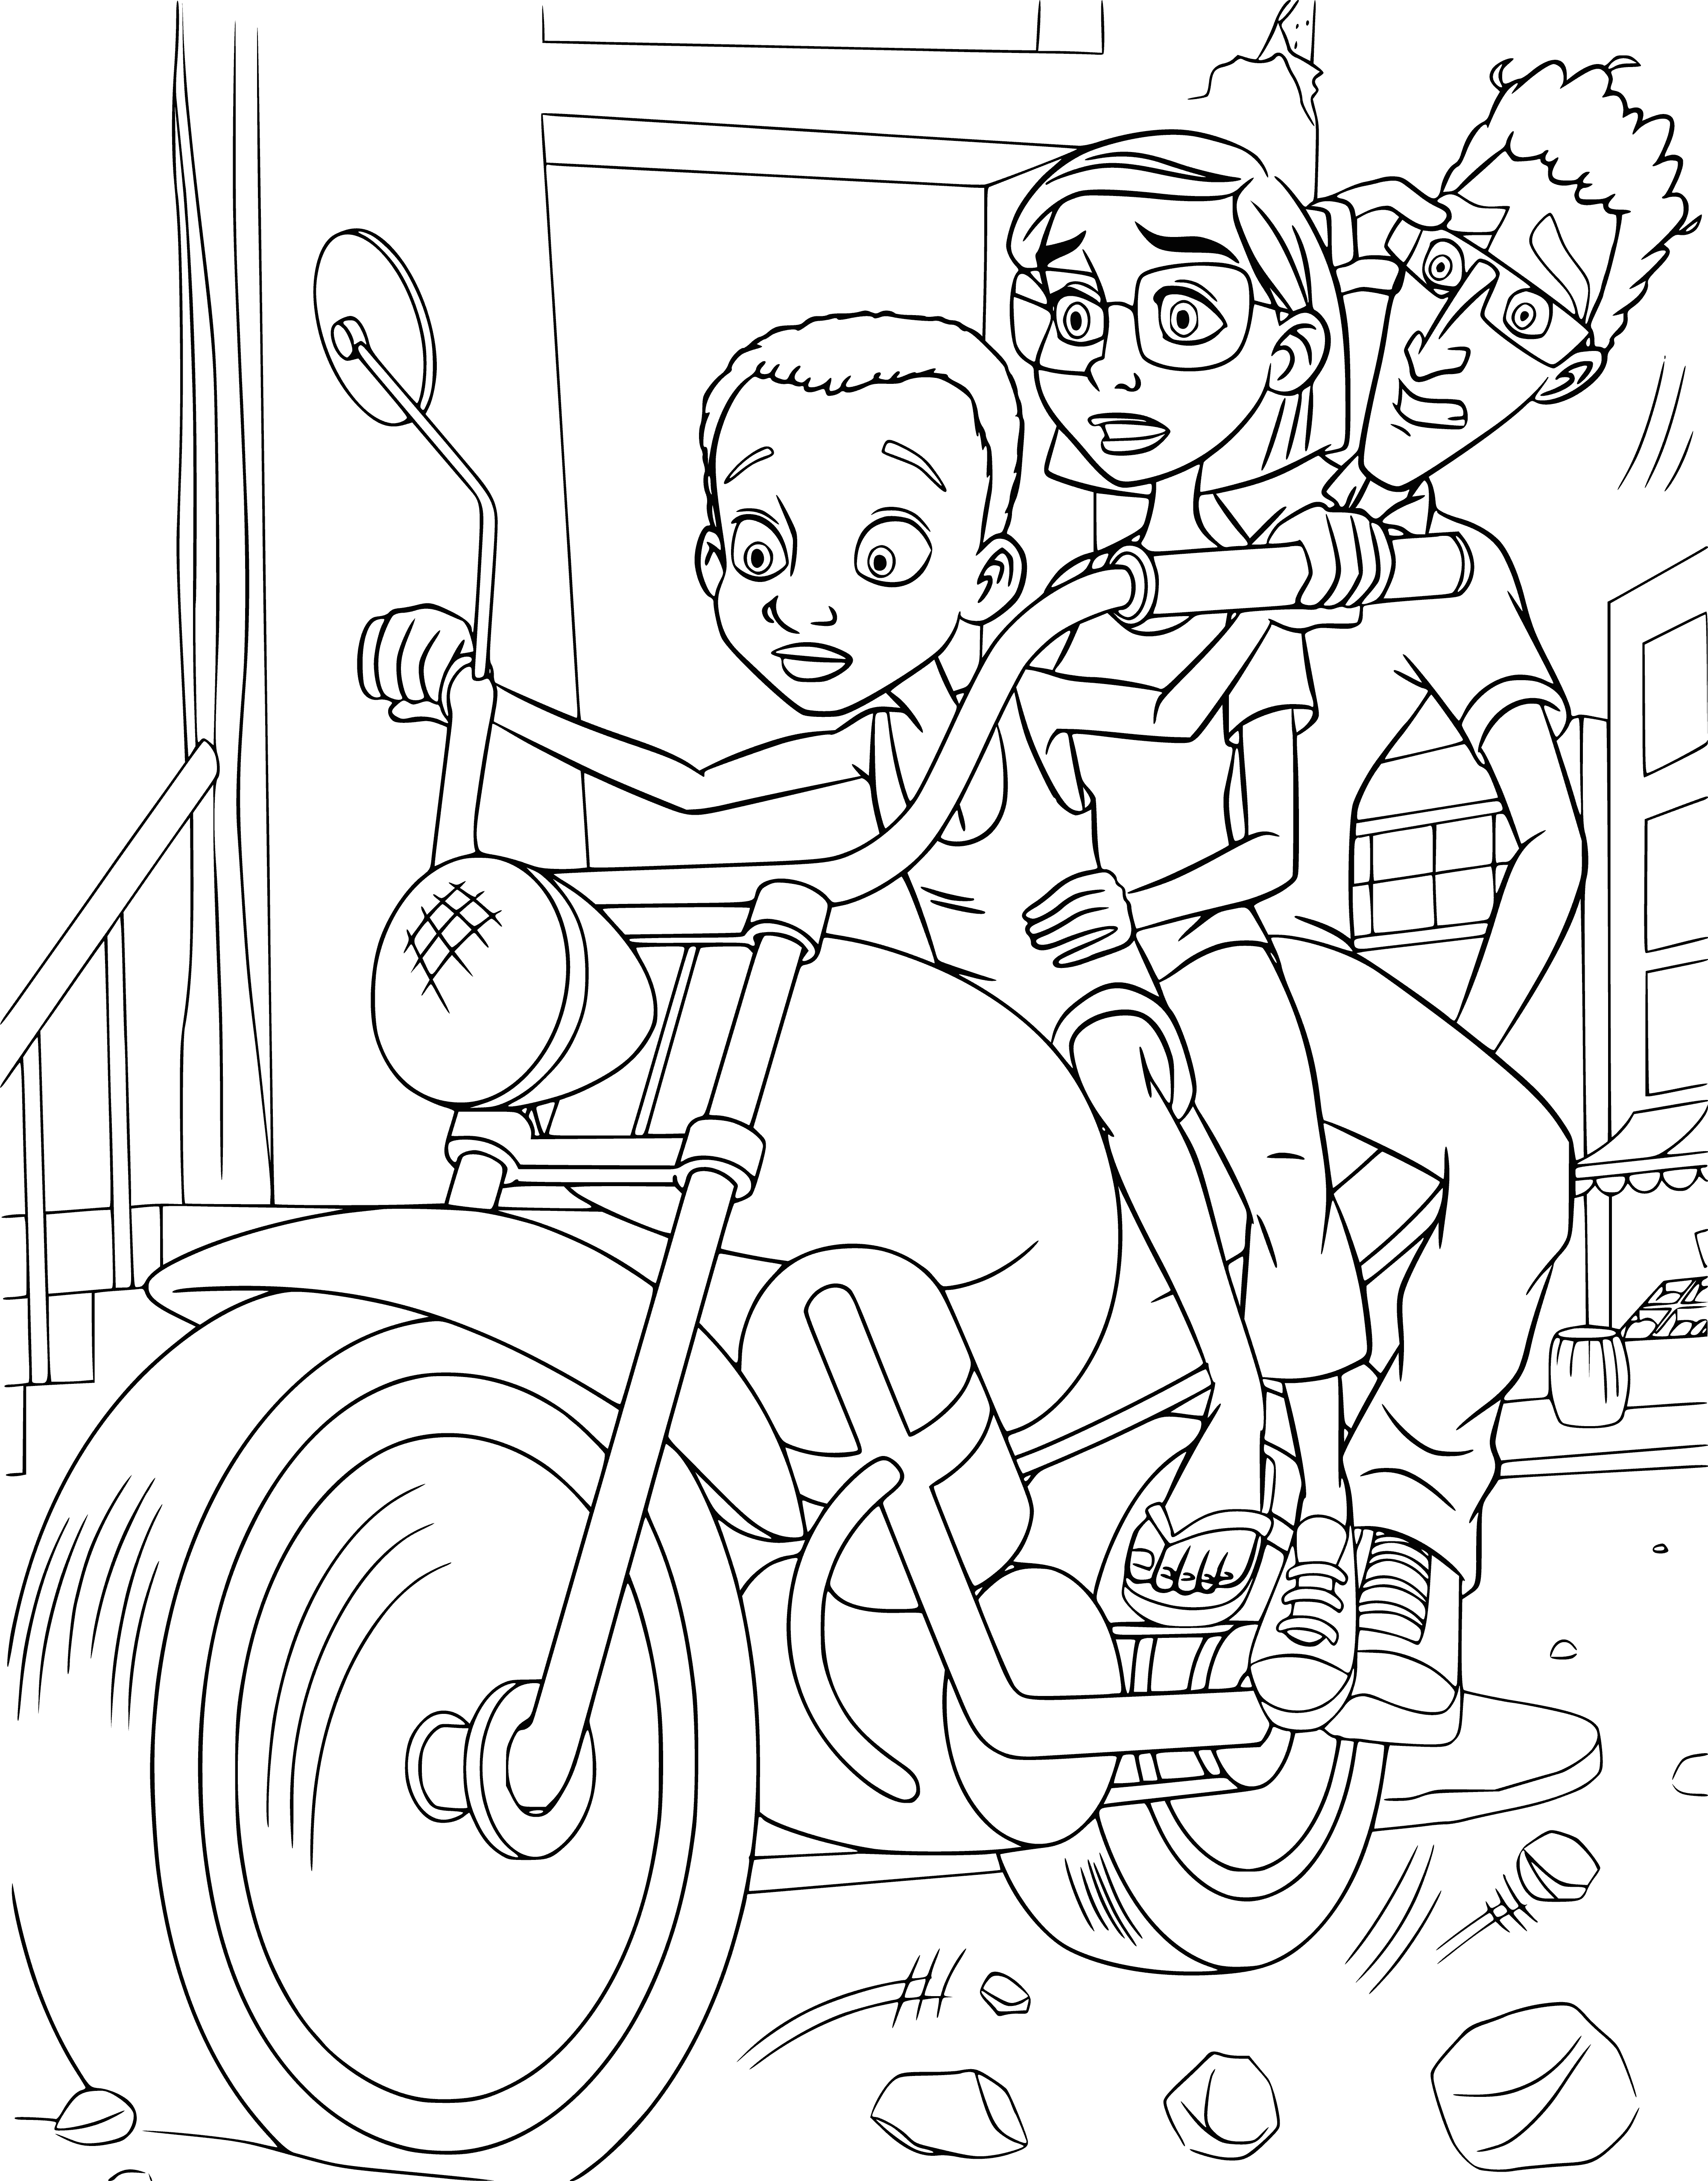 coloring page: Man pursues chicken on beach in pursuit of adventure. He wears blue and carries flip flops. Ready for the chase! #Rio